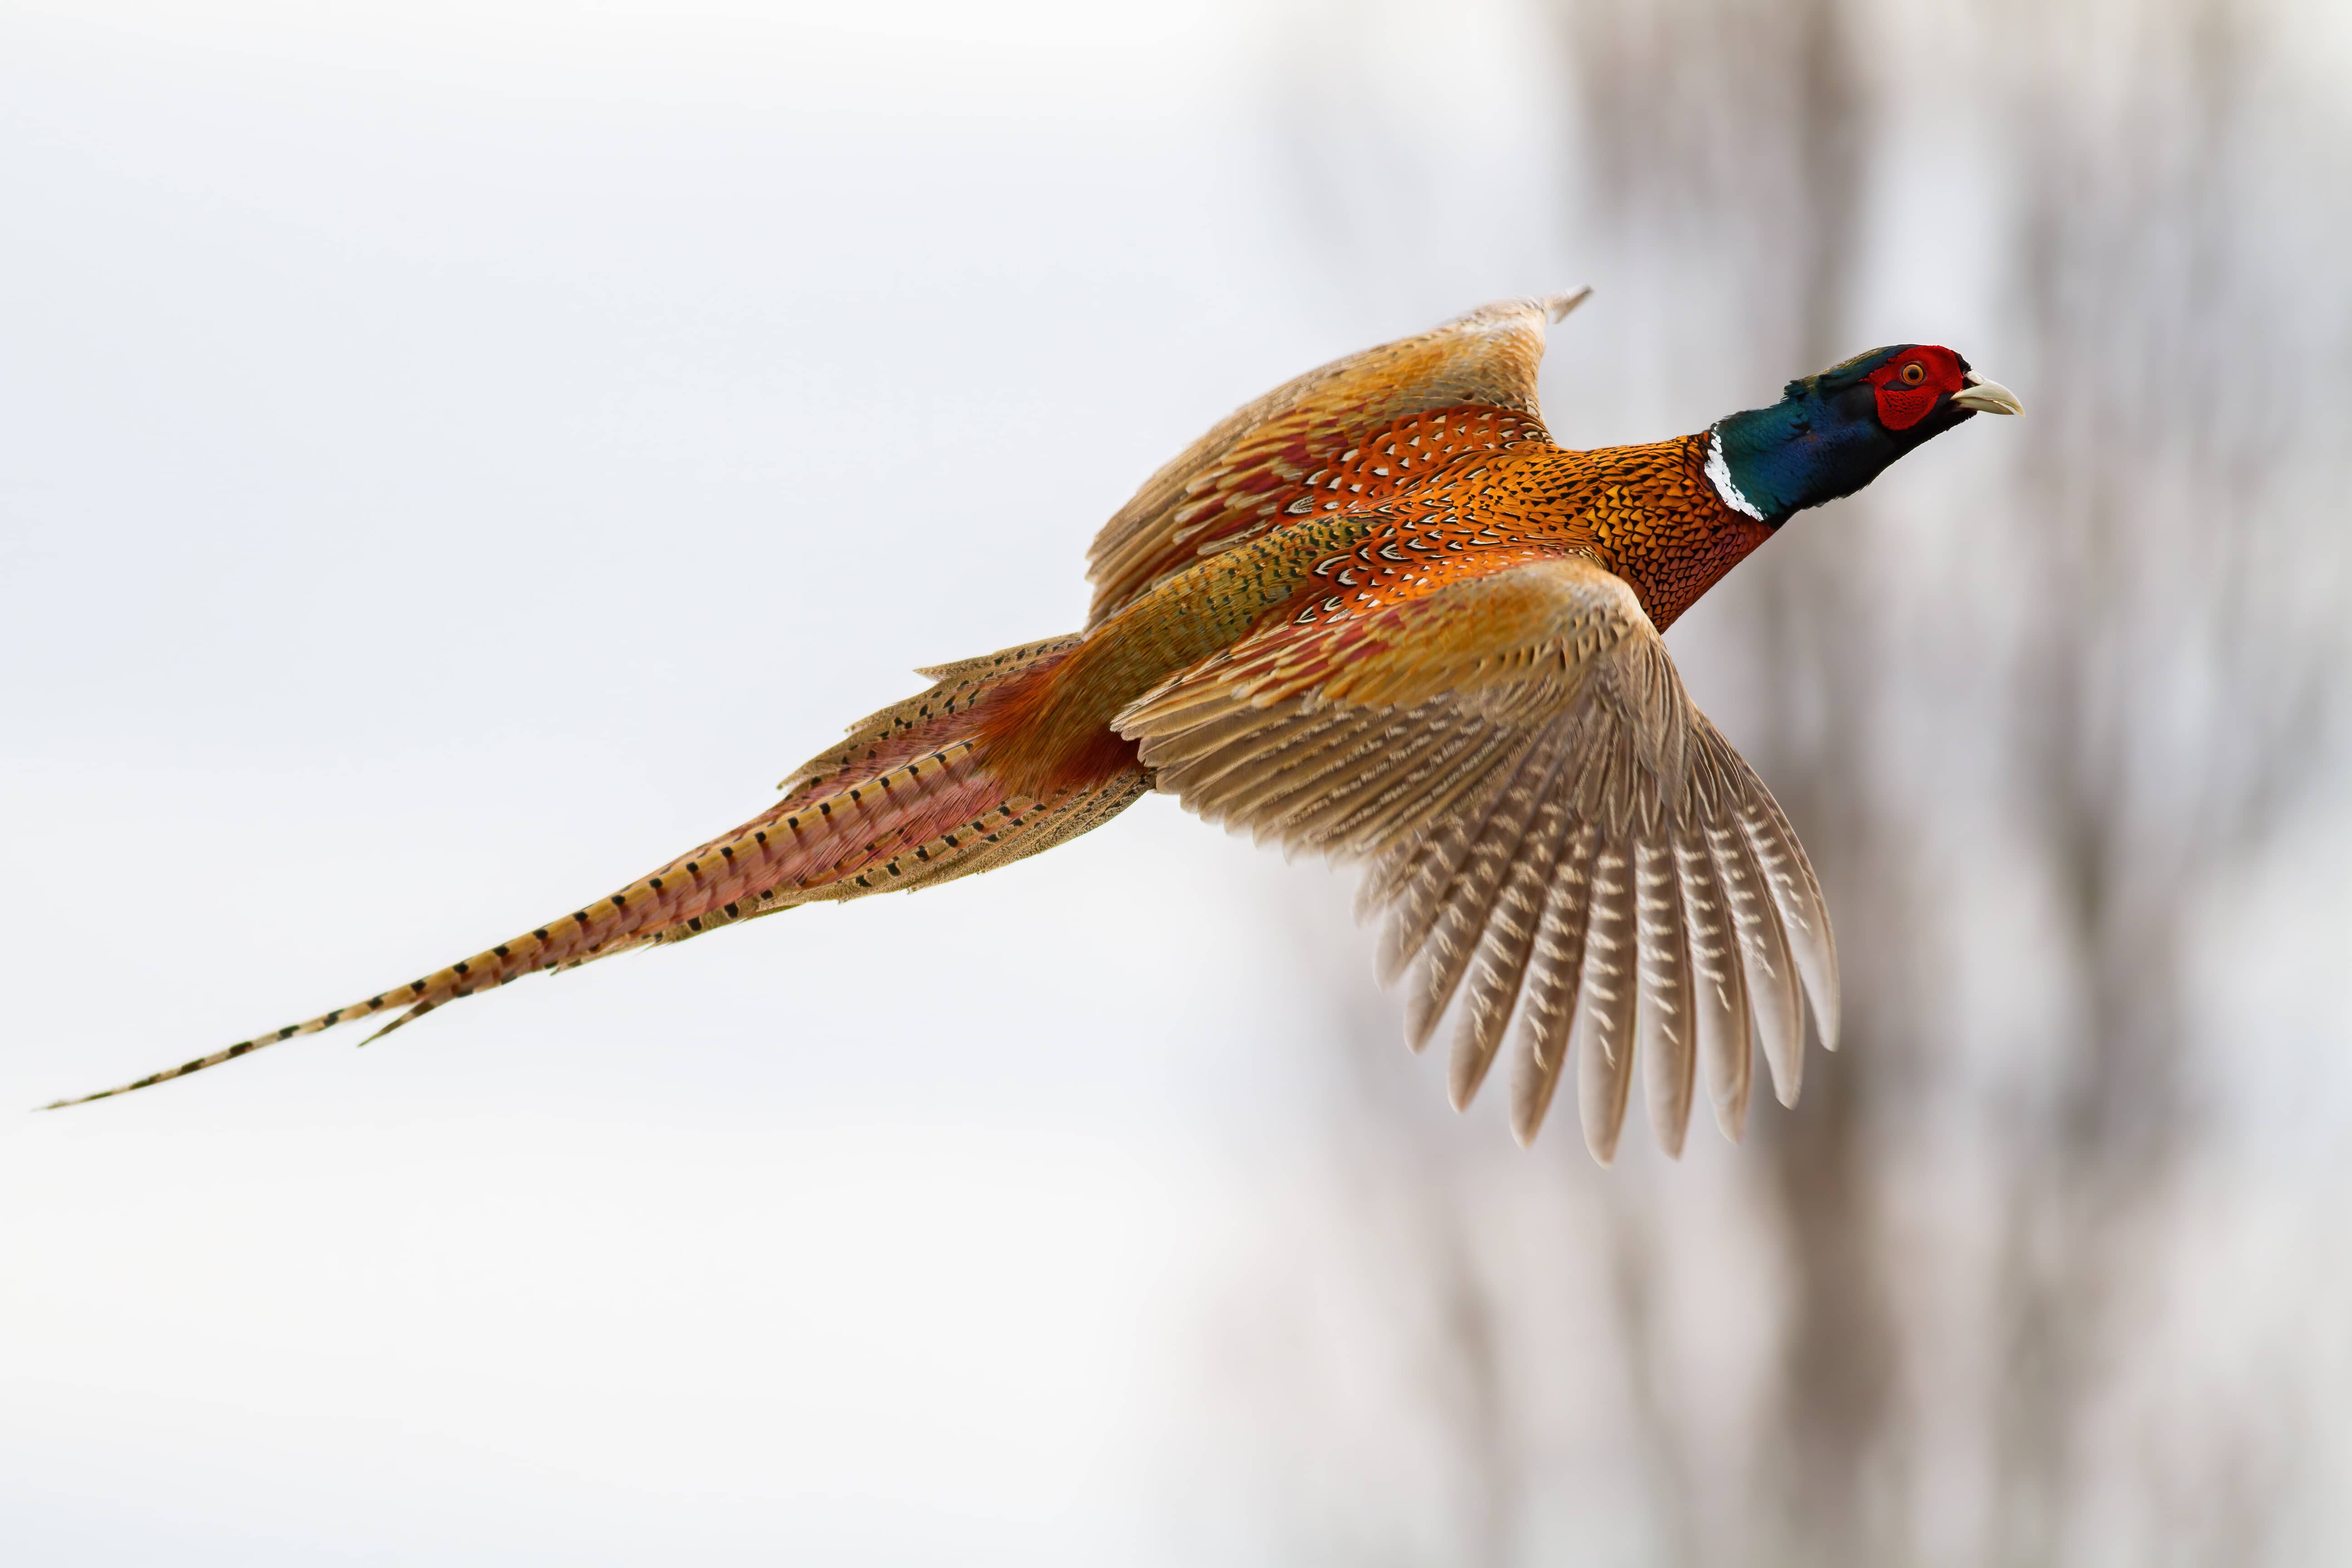 common-pheasant-flying-in-the-air-in-winter-nature